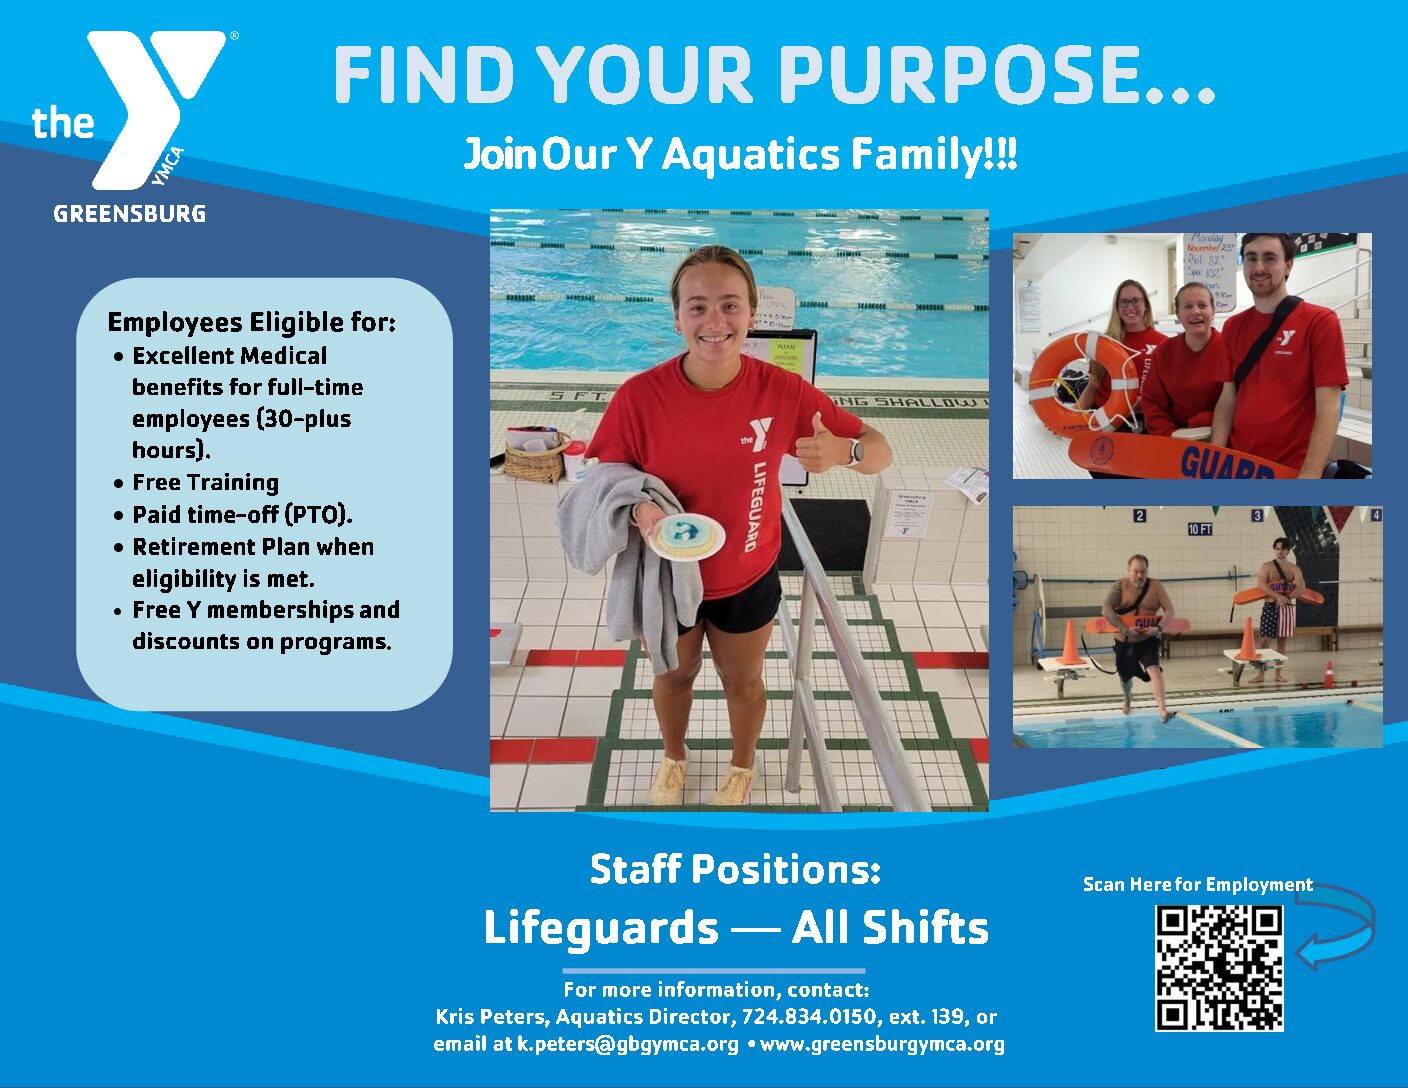 Join Our Y Aquatics Family-Lifeguards Needed for All Shifts